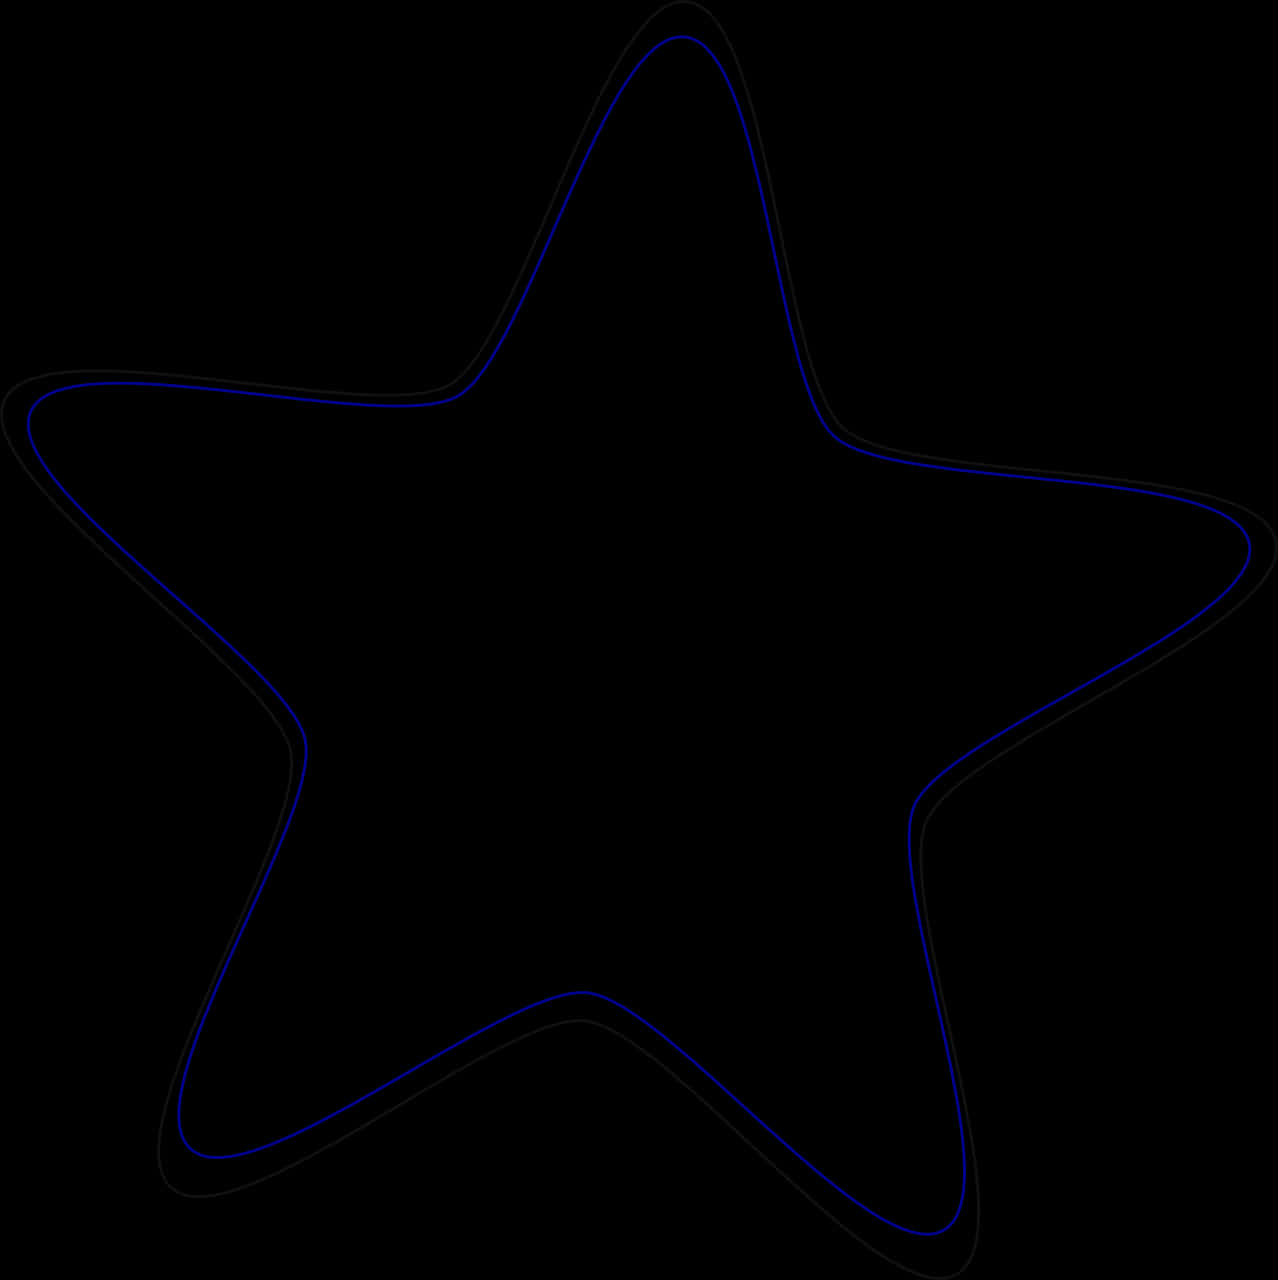 Abstract Black Star Outline PNG image